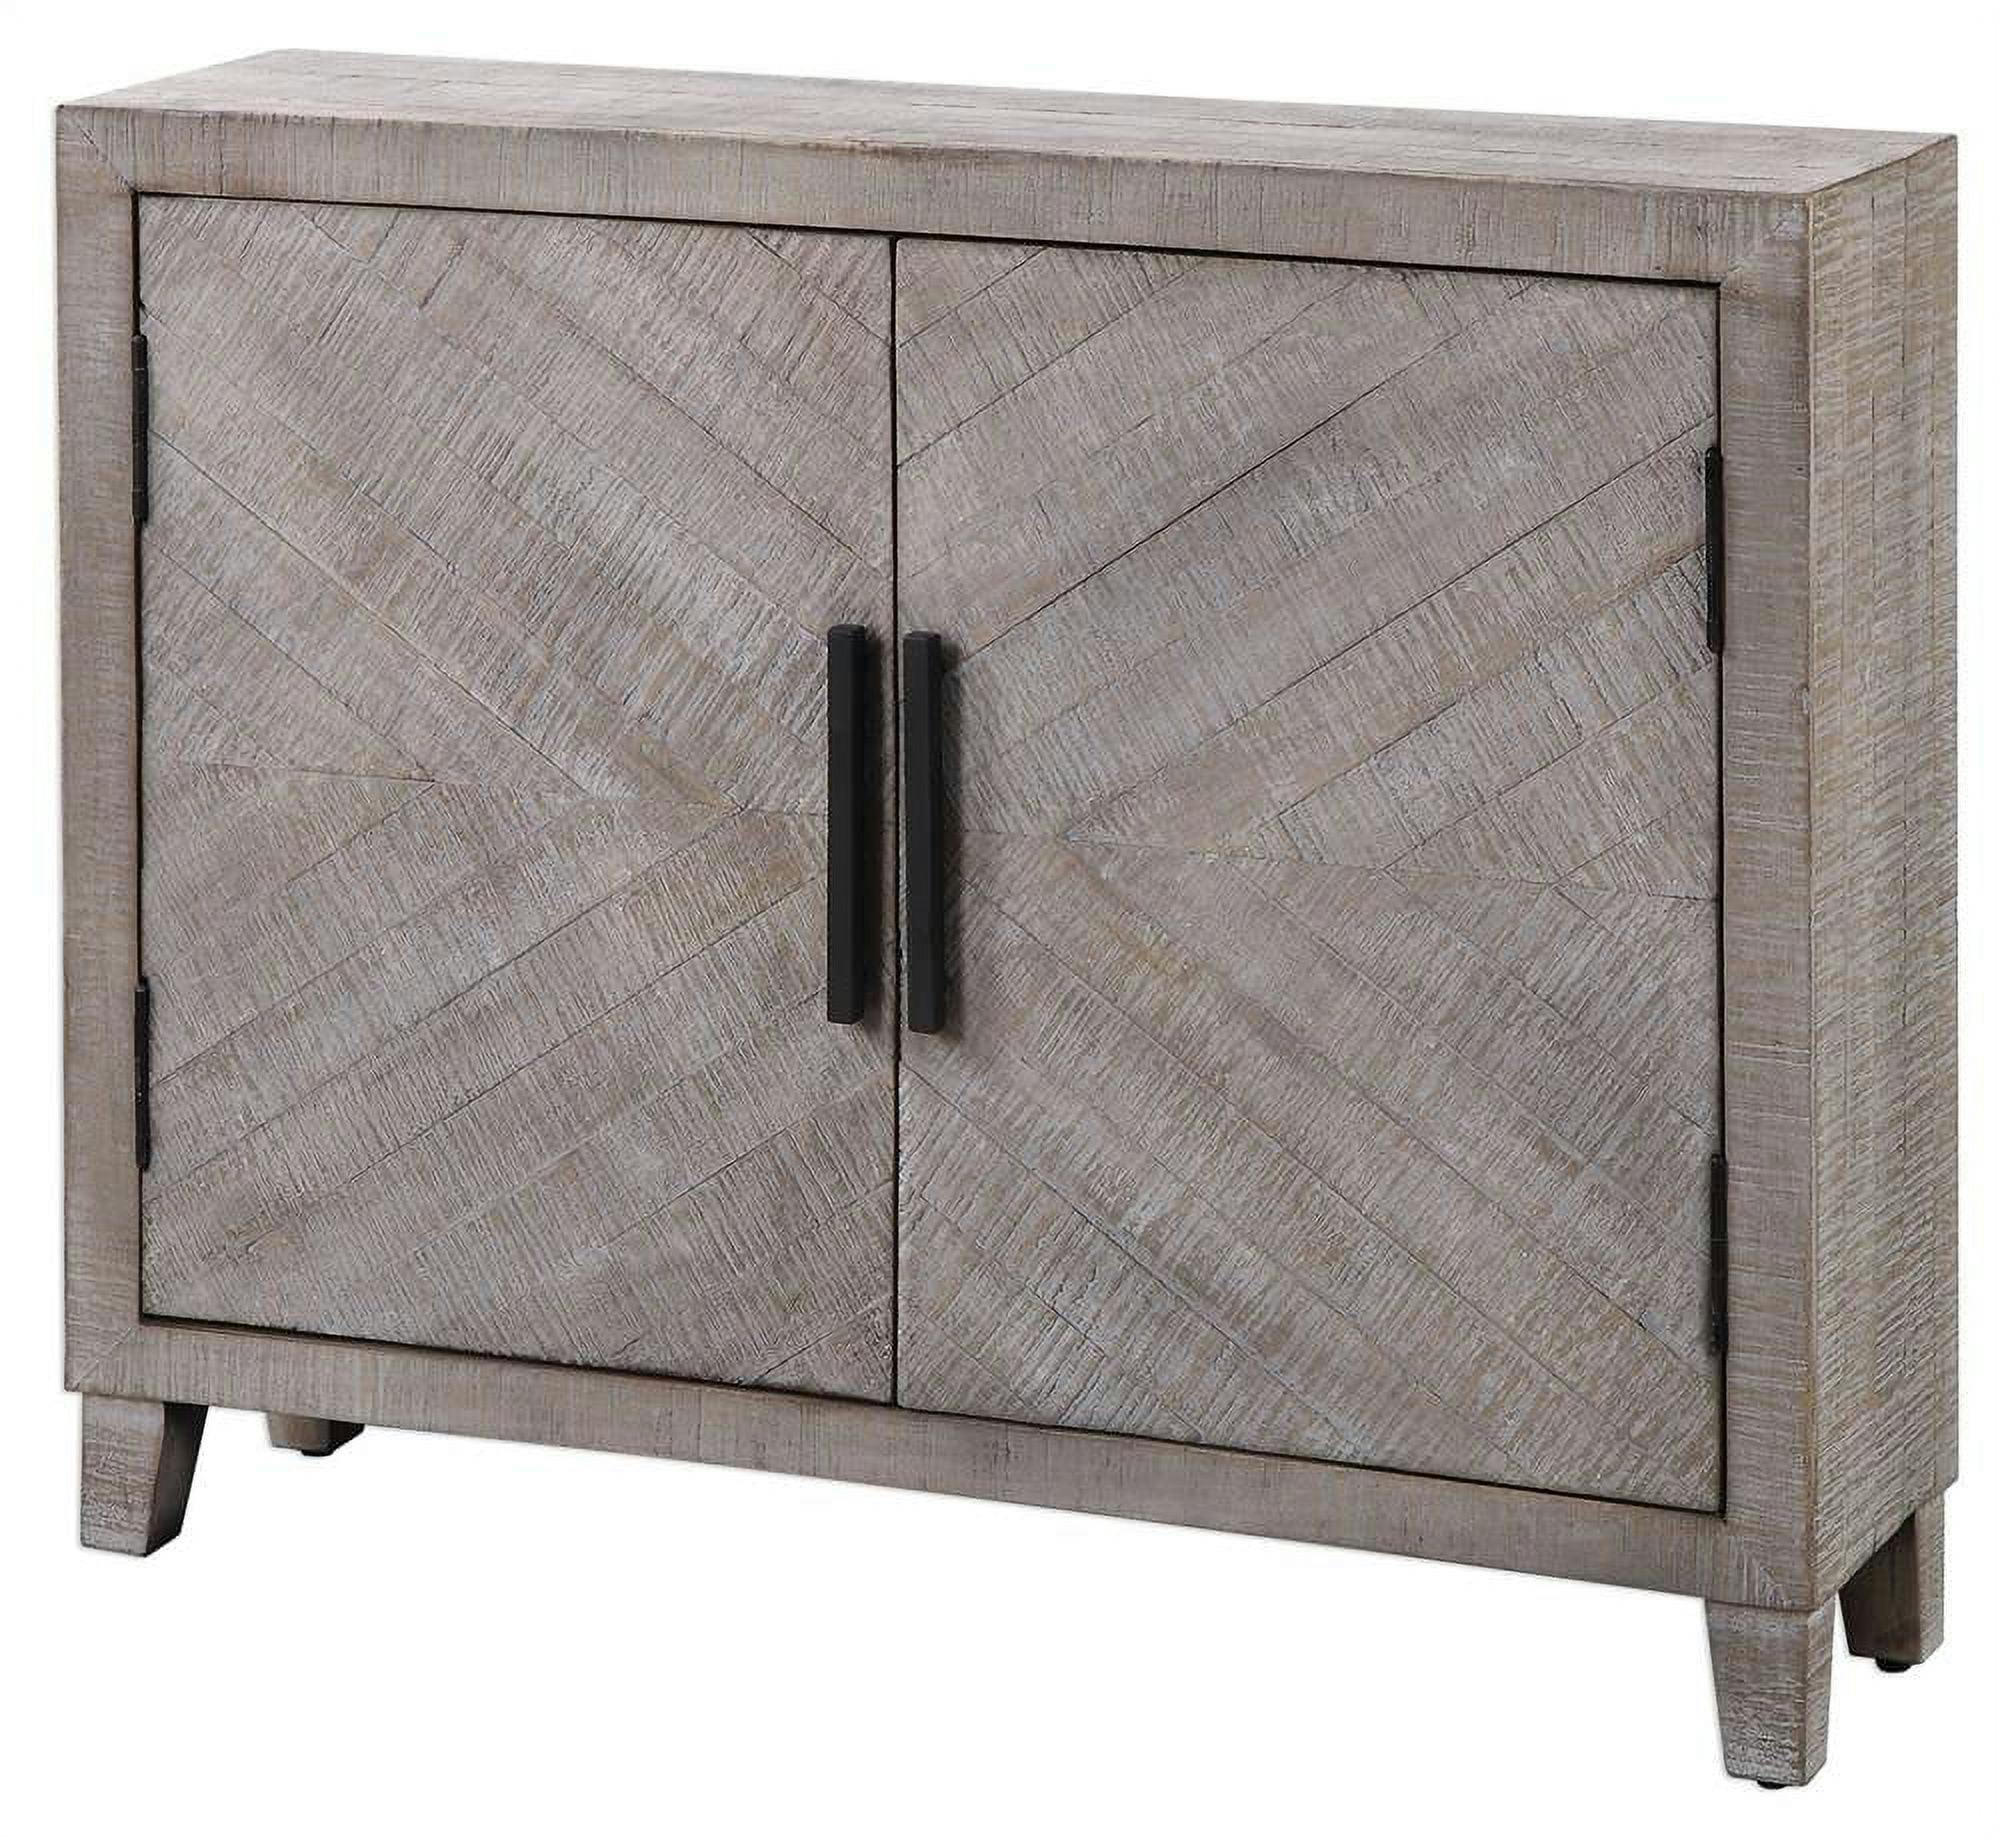 Adalind Rustic White Washed Adjustable Shelving Accent Cabinet